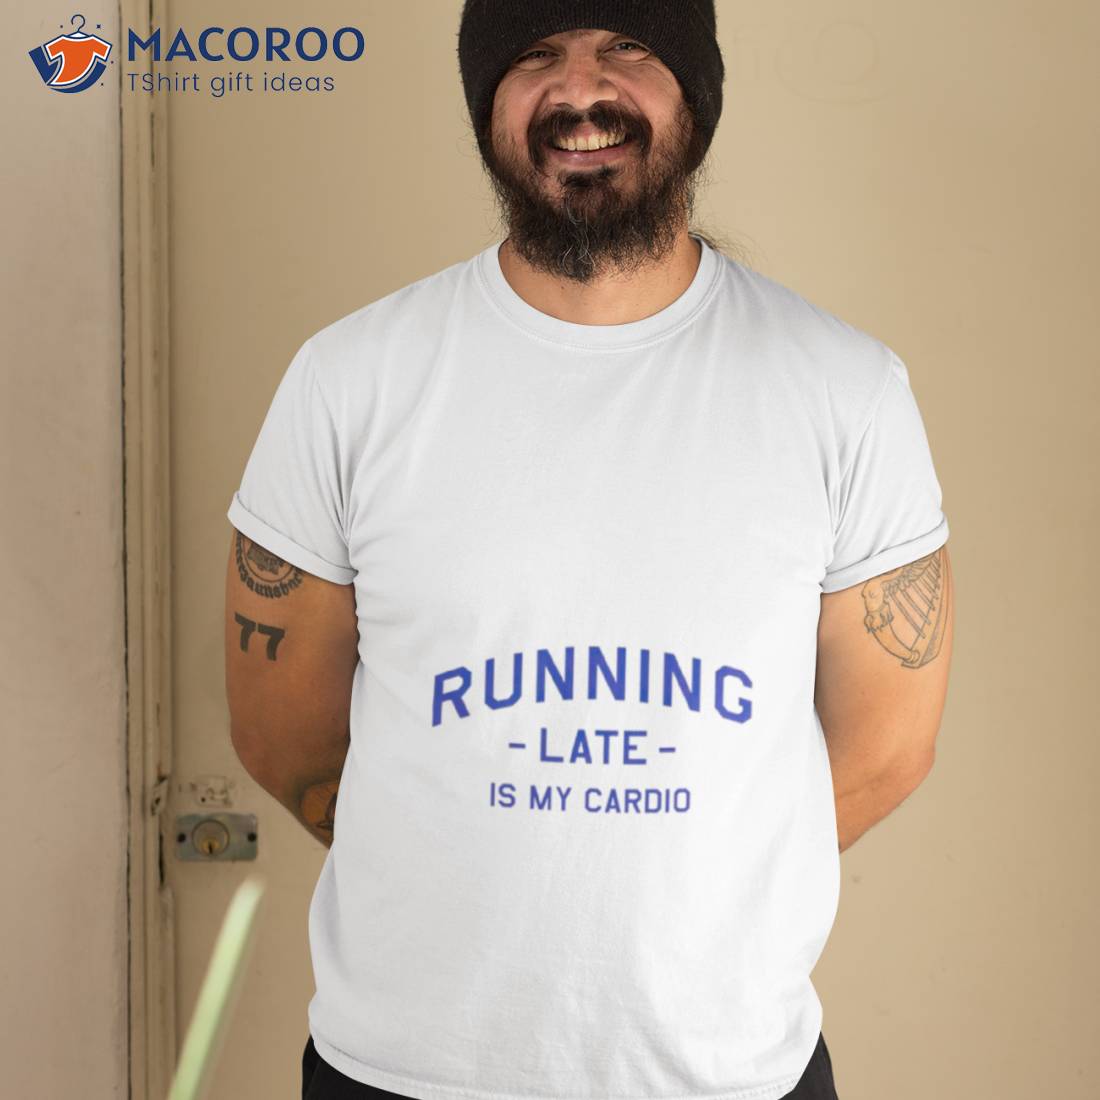 funny running quotes for shirts